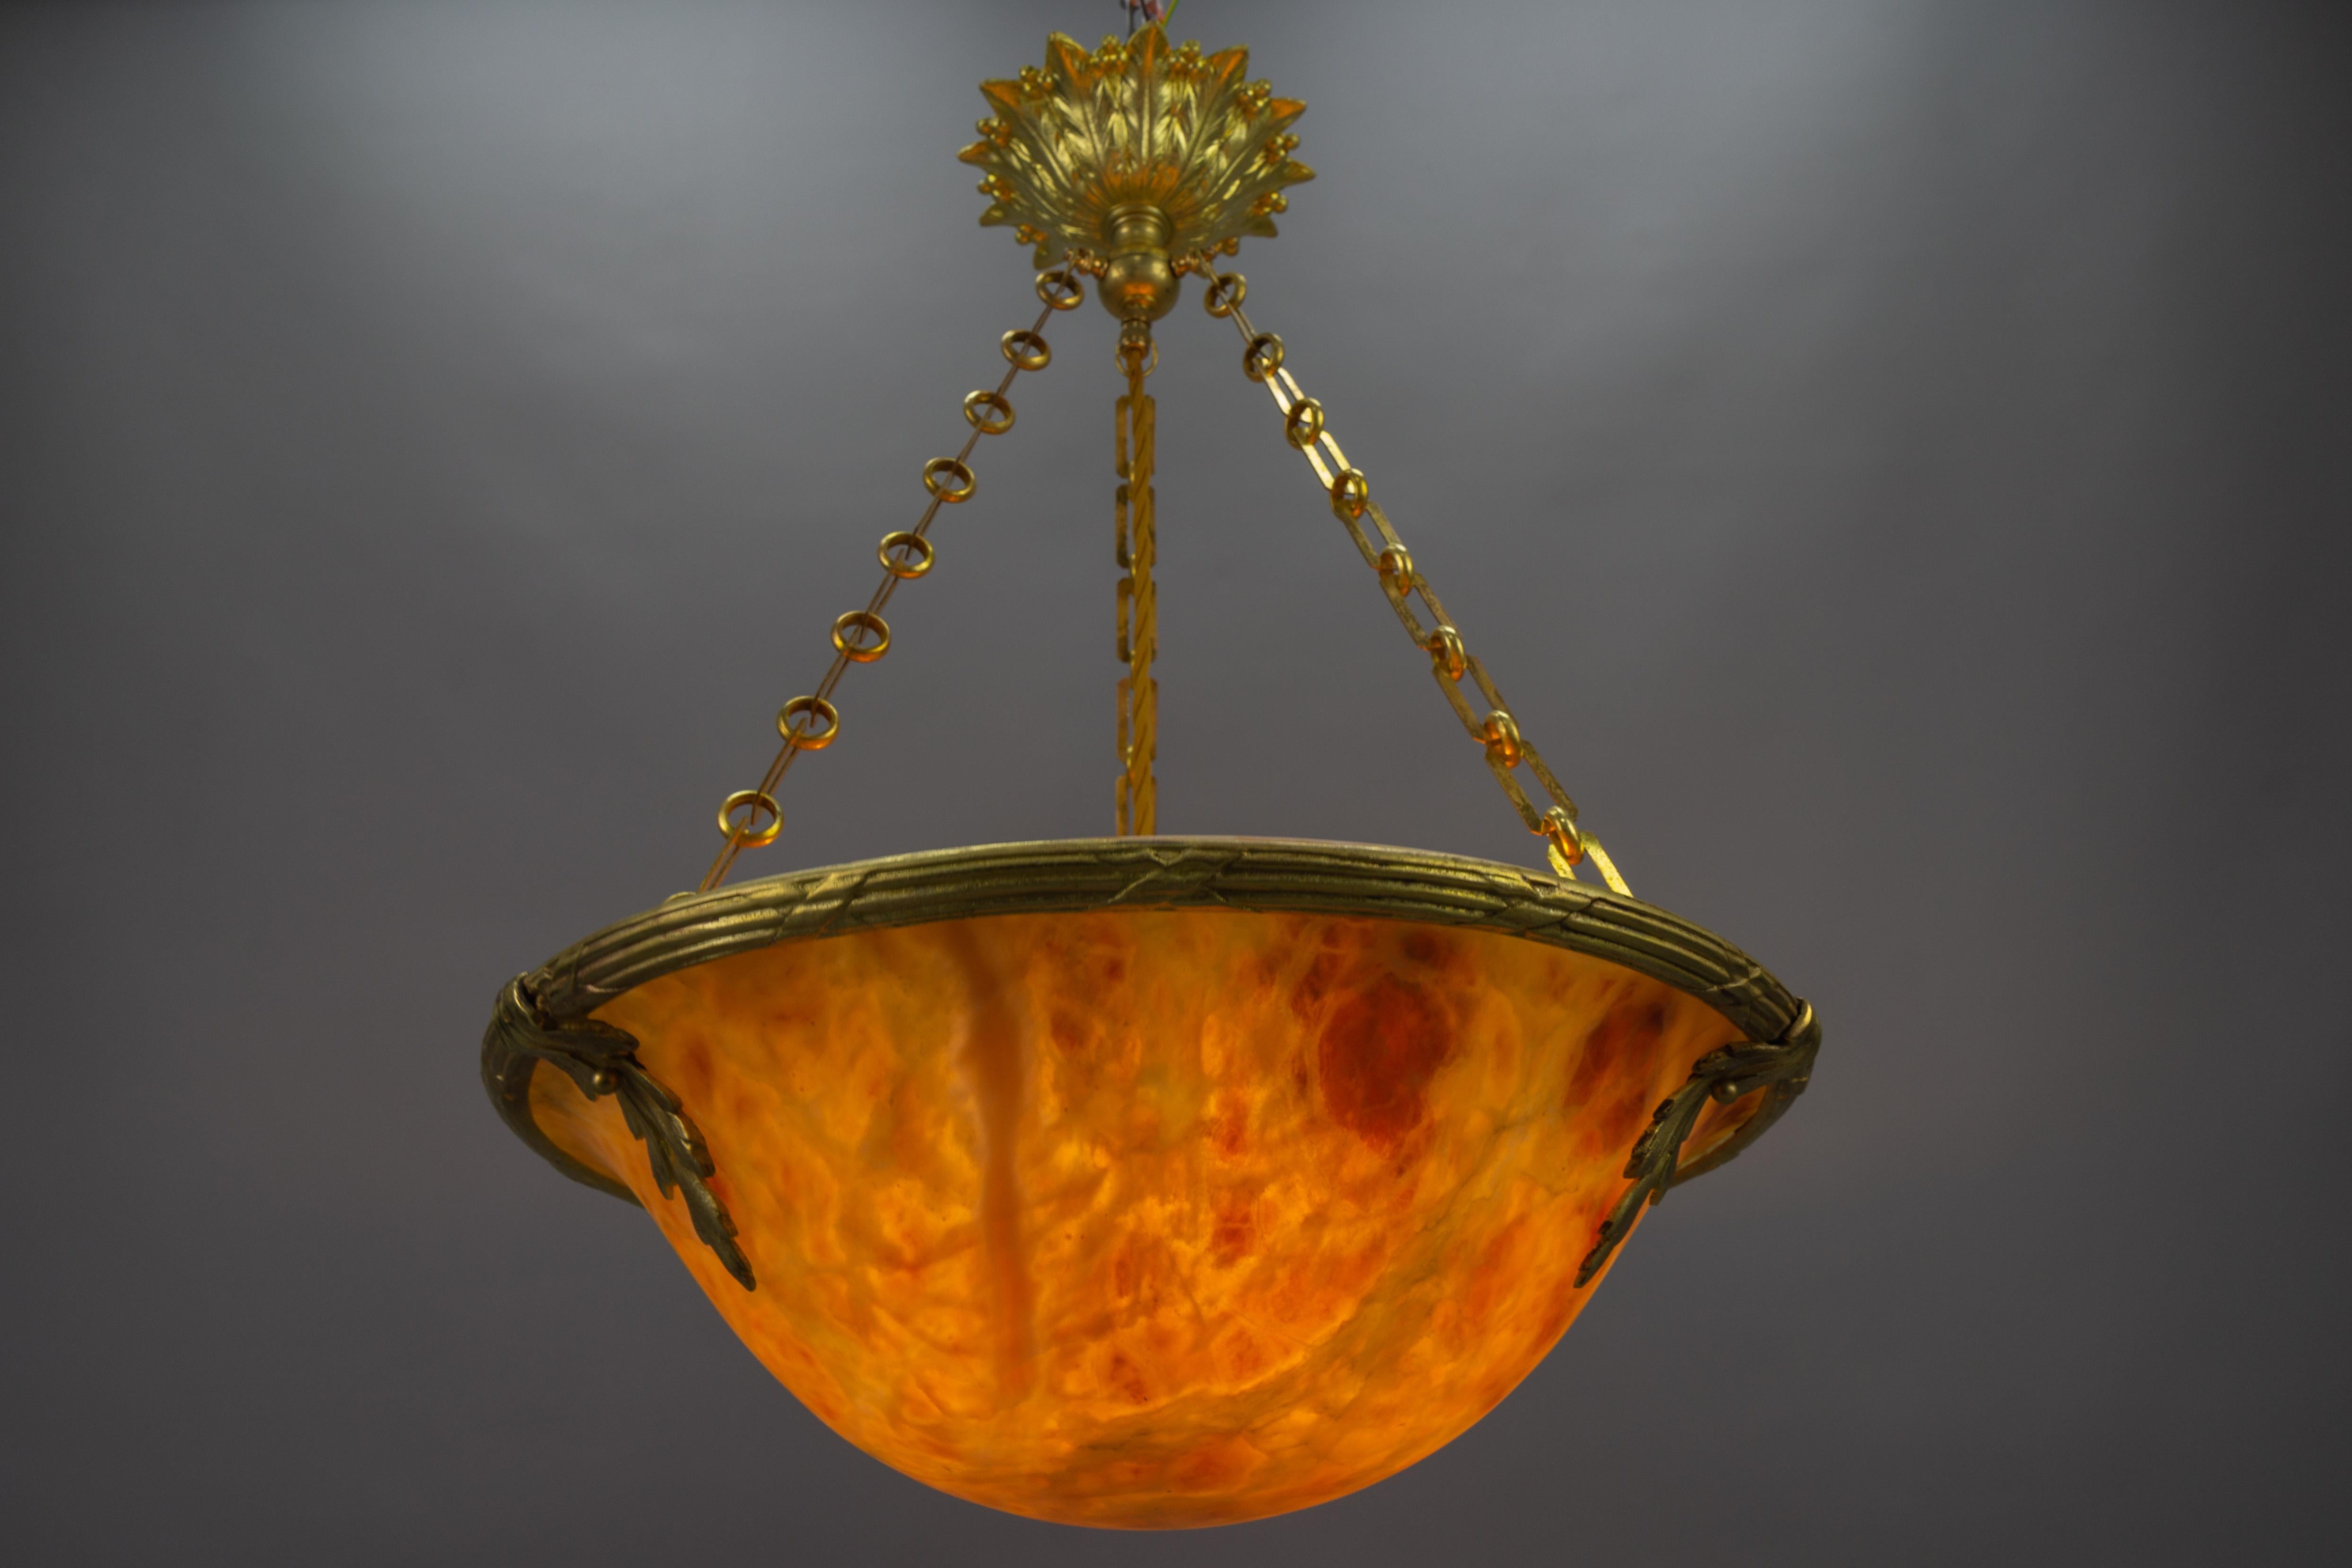 A magnificent Neoclassical style amber color alabaster pendant ceiling light fixture with an ornate bronze frame. France, 1920s. 
This masterfully carved beautiful alabaster bowl is held by a bronze rim with leaf-shaped attachments and suspended by